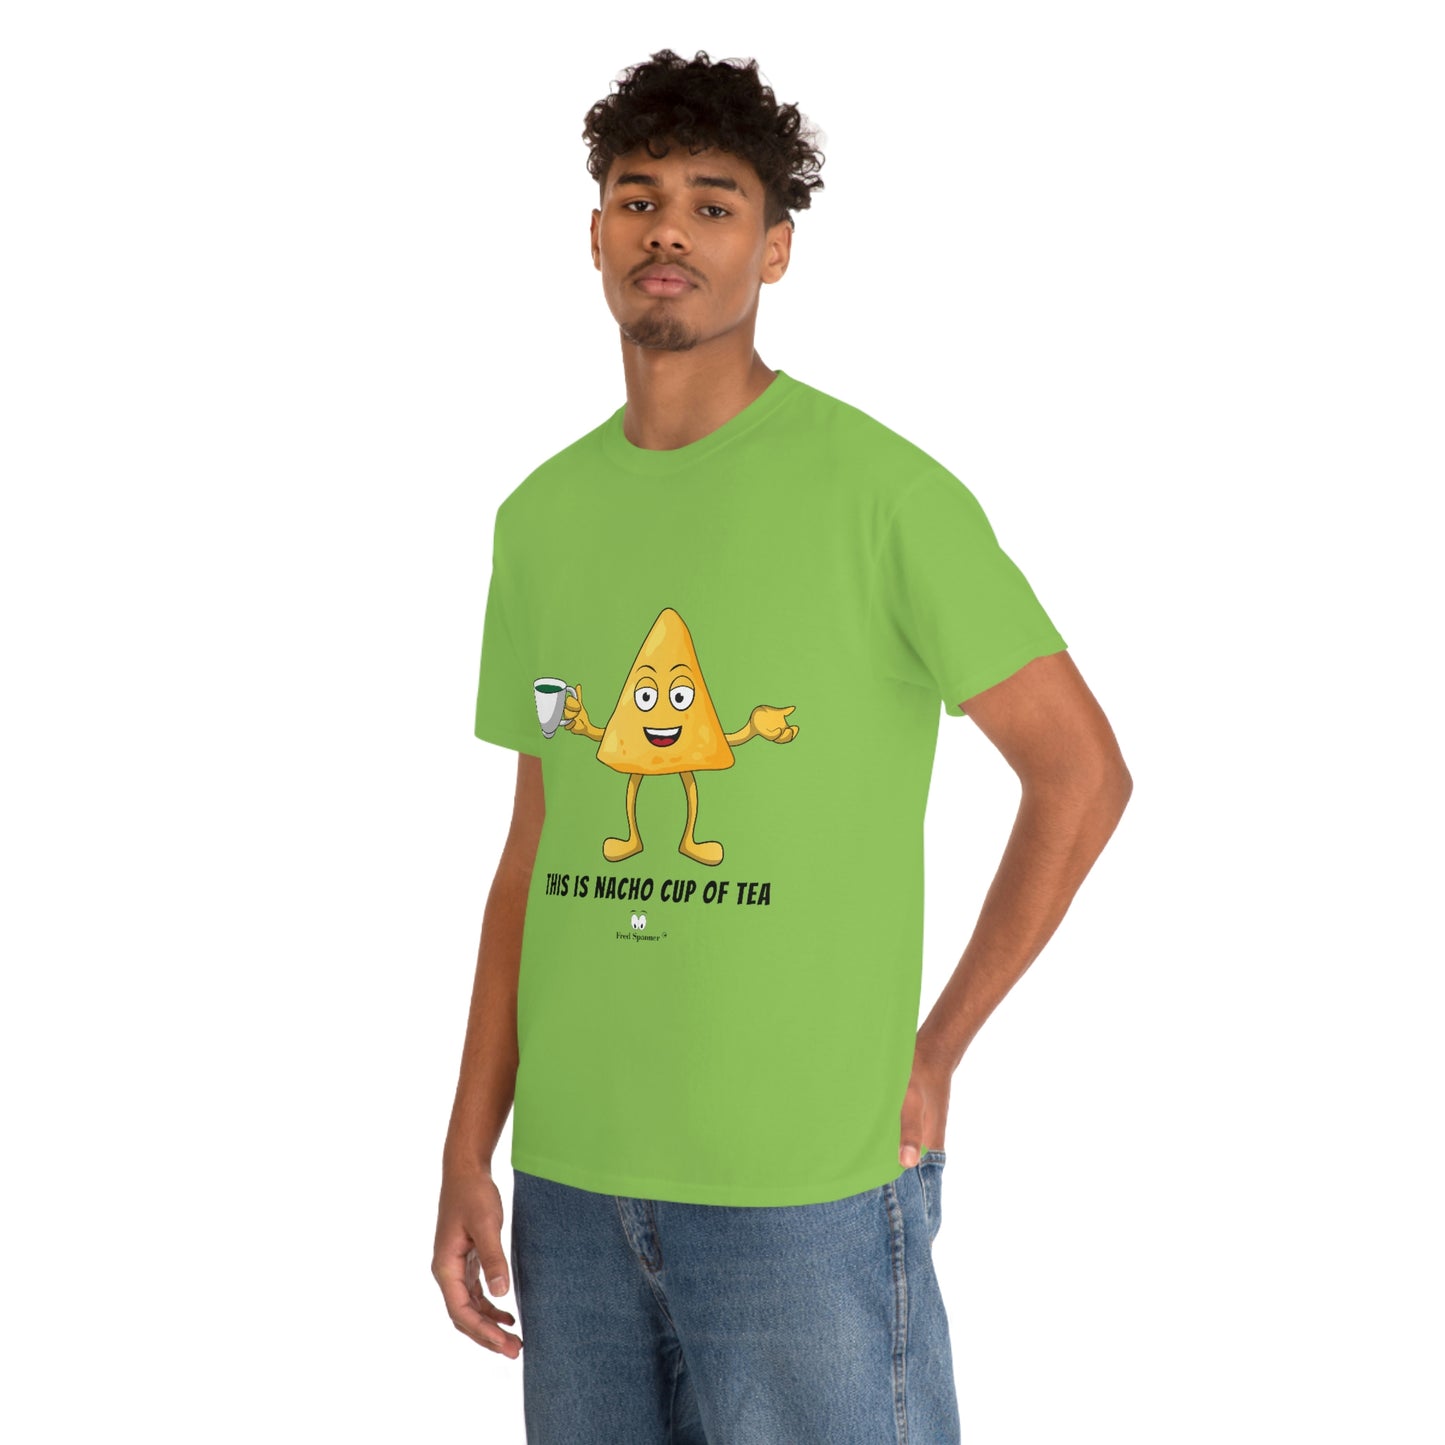 This is nacho cup of tea. Cotton Tee